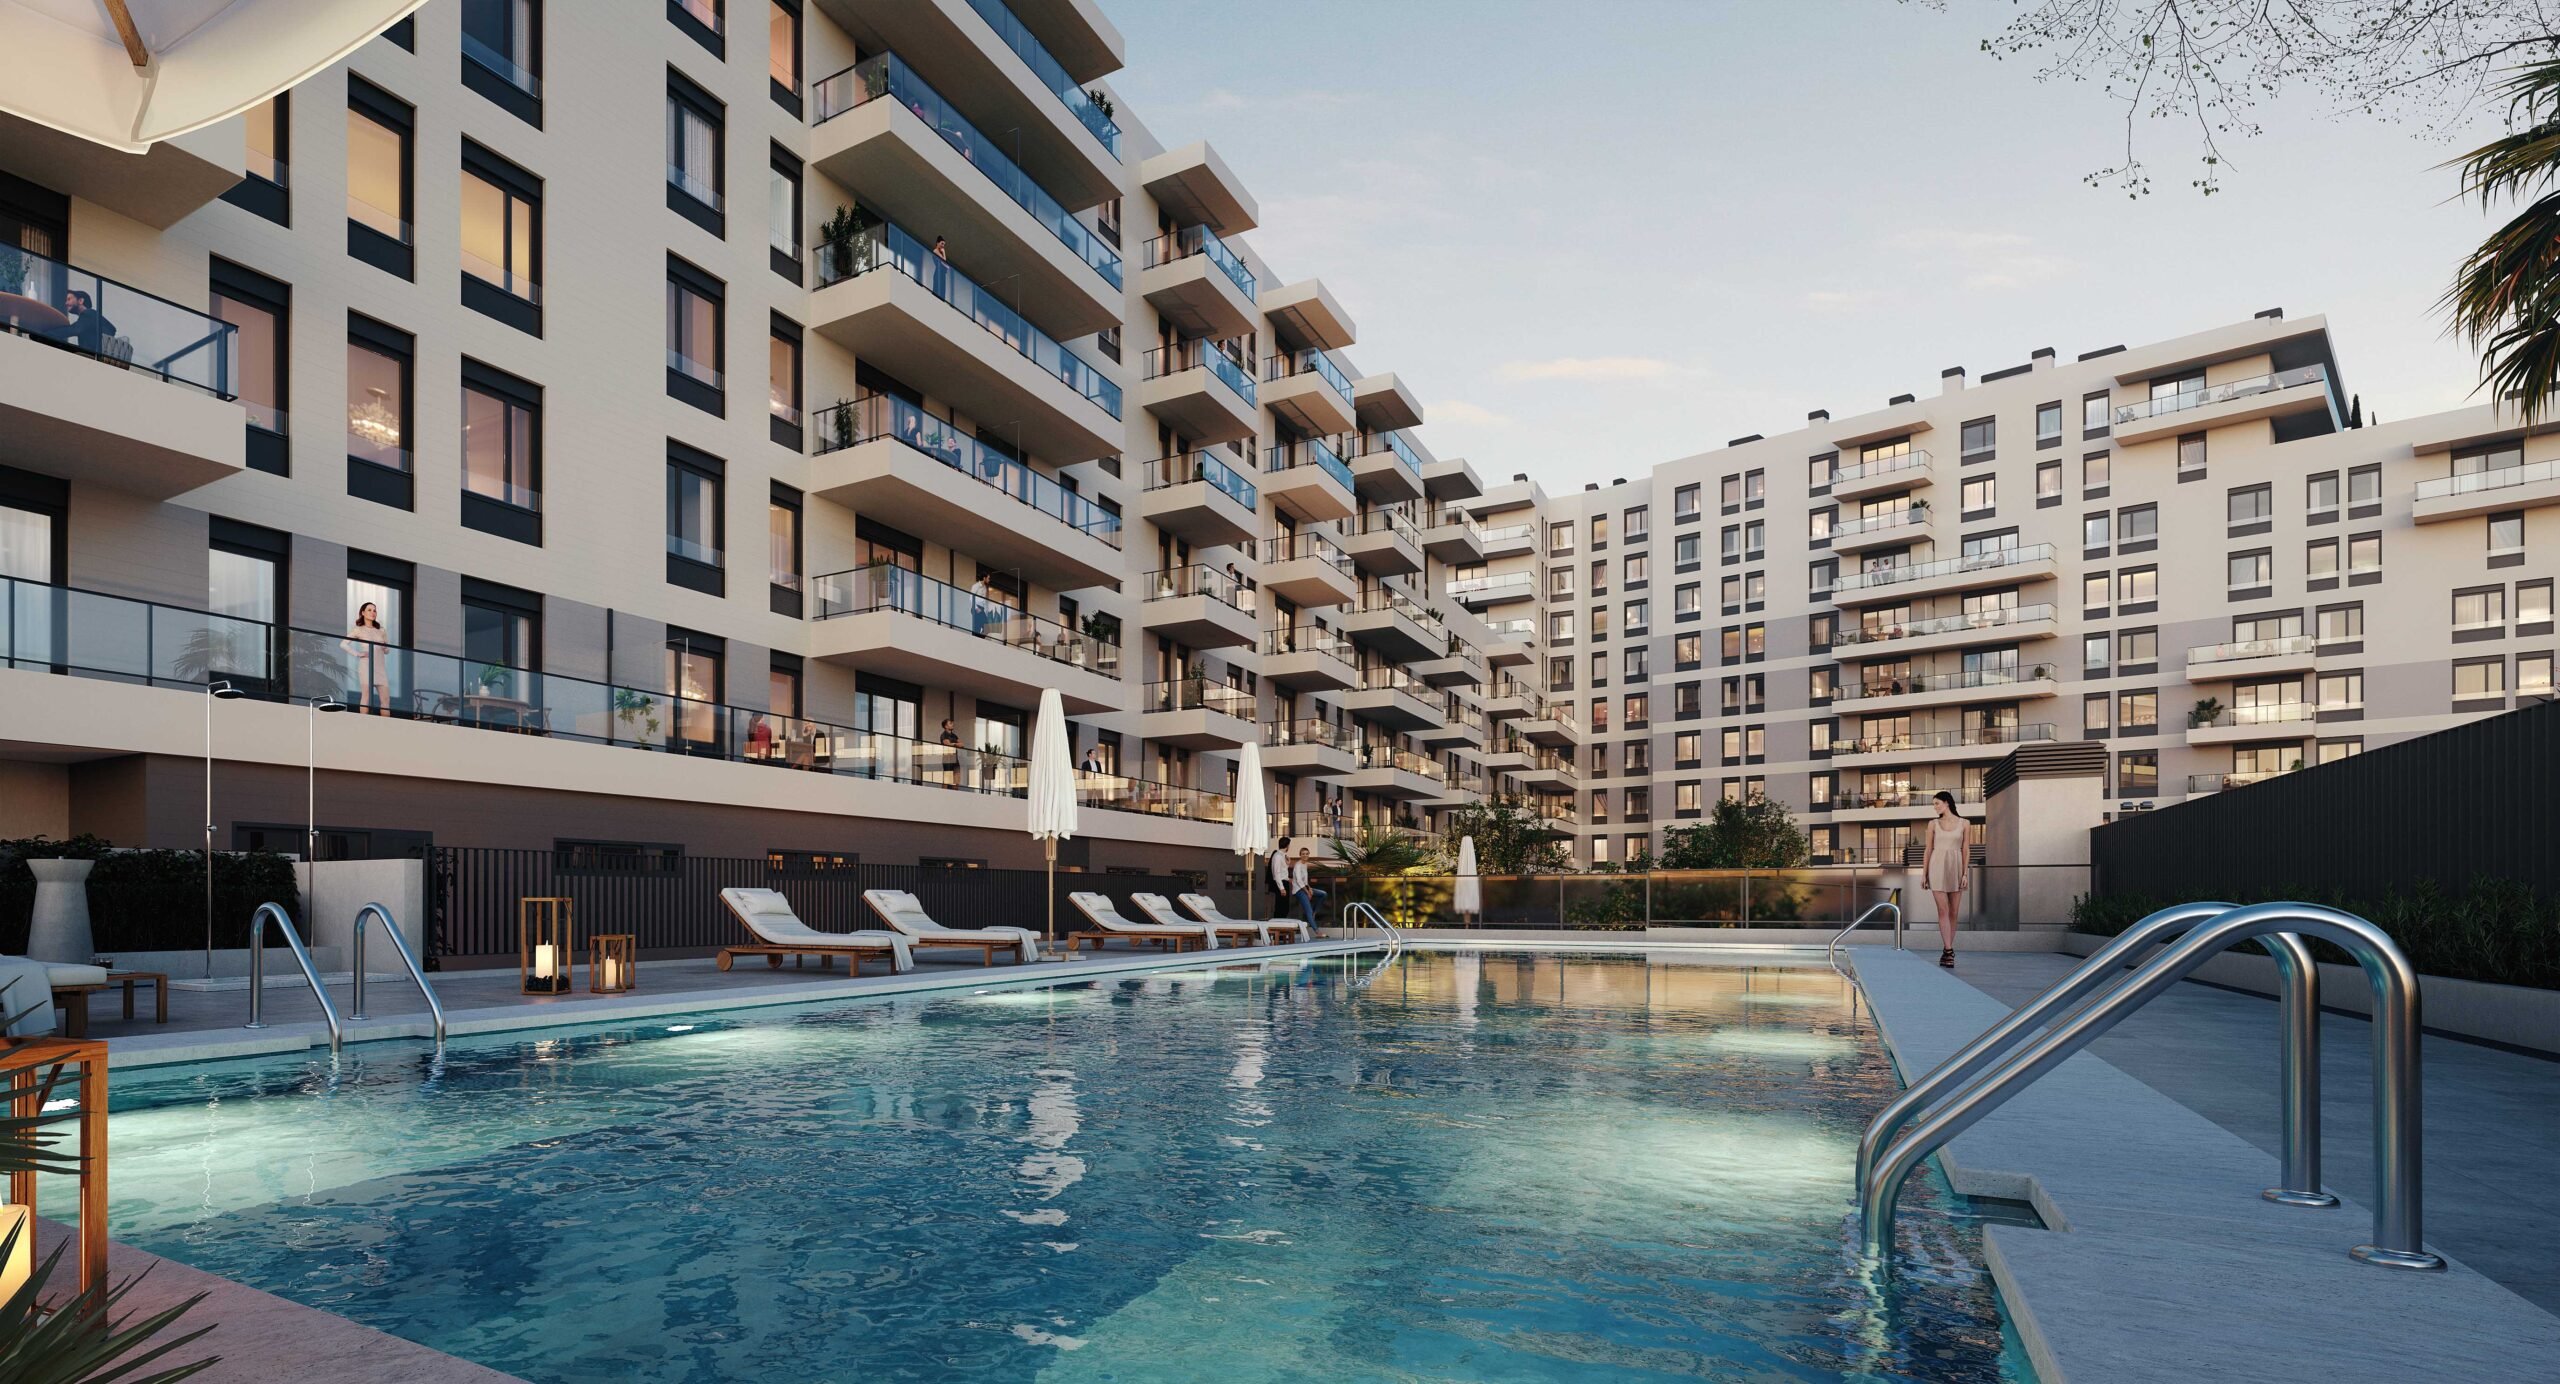 The London building in the Urban Fira residential complex in Barcelona, sustainability is certified by BREEAM and DGNB.